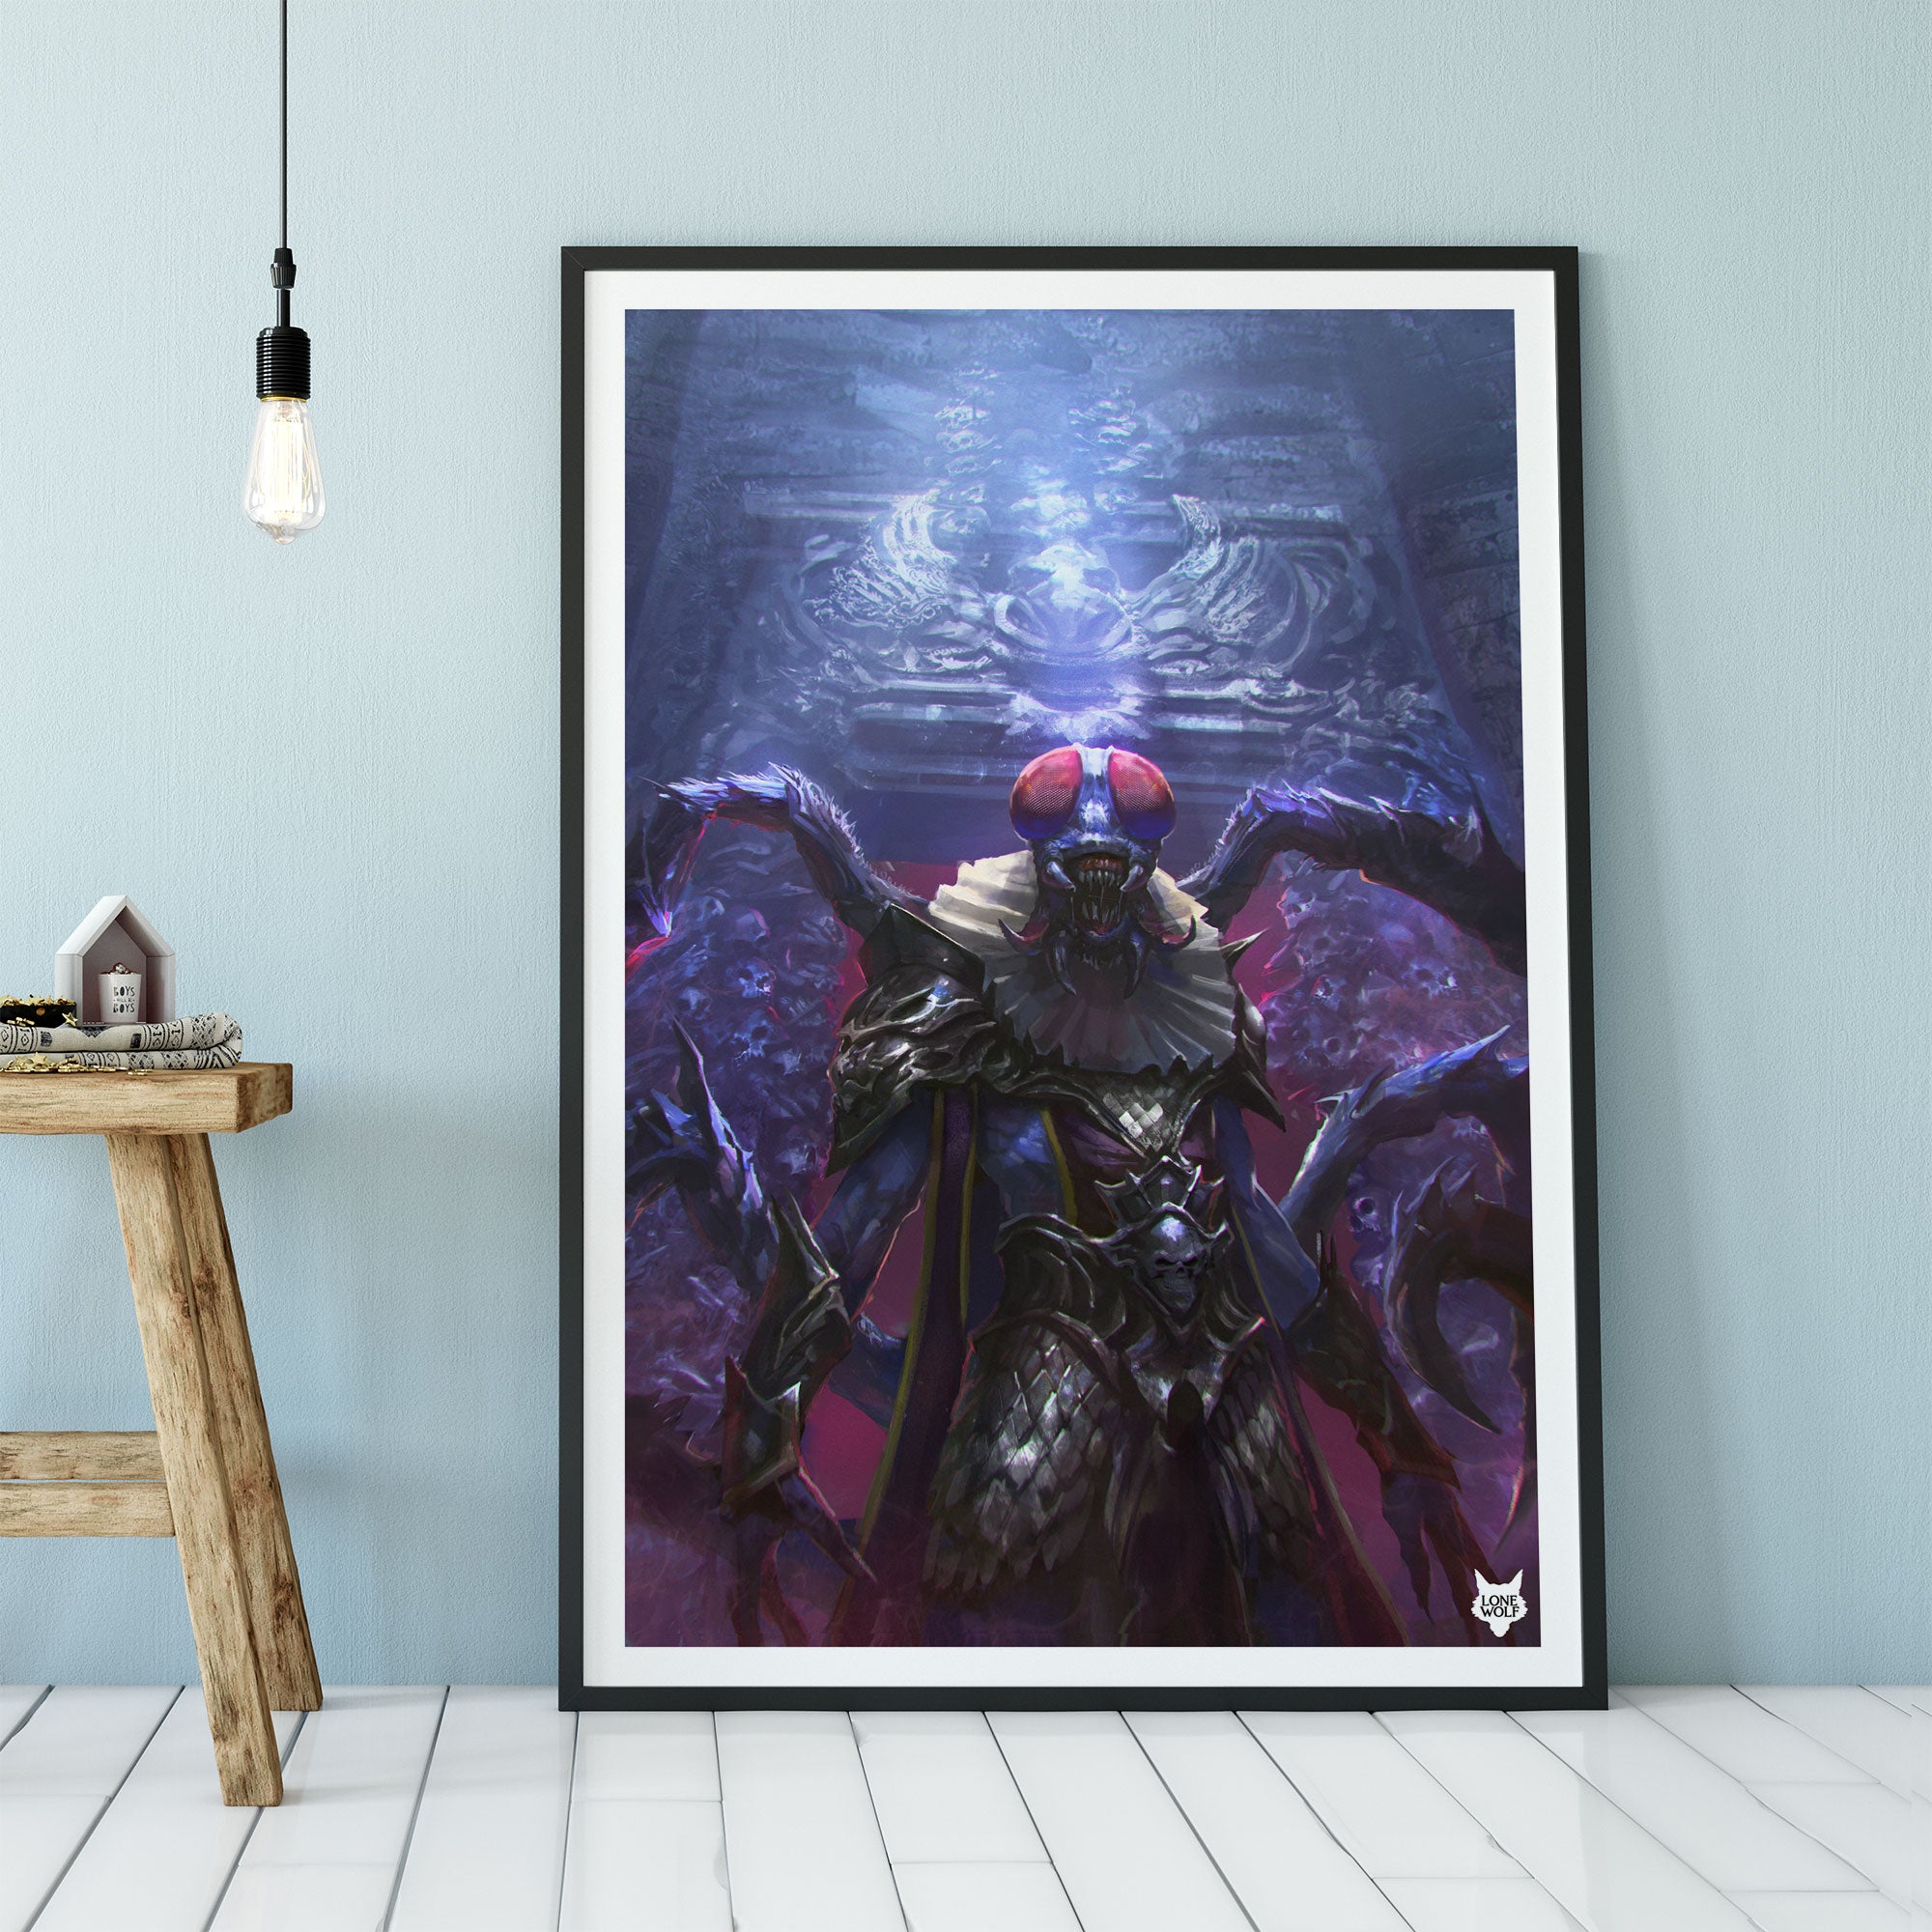 The Masters Of Darkness Framed Art Print